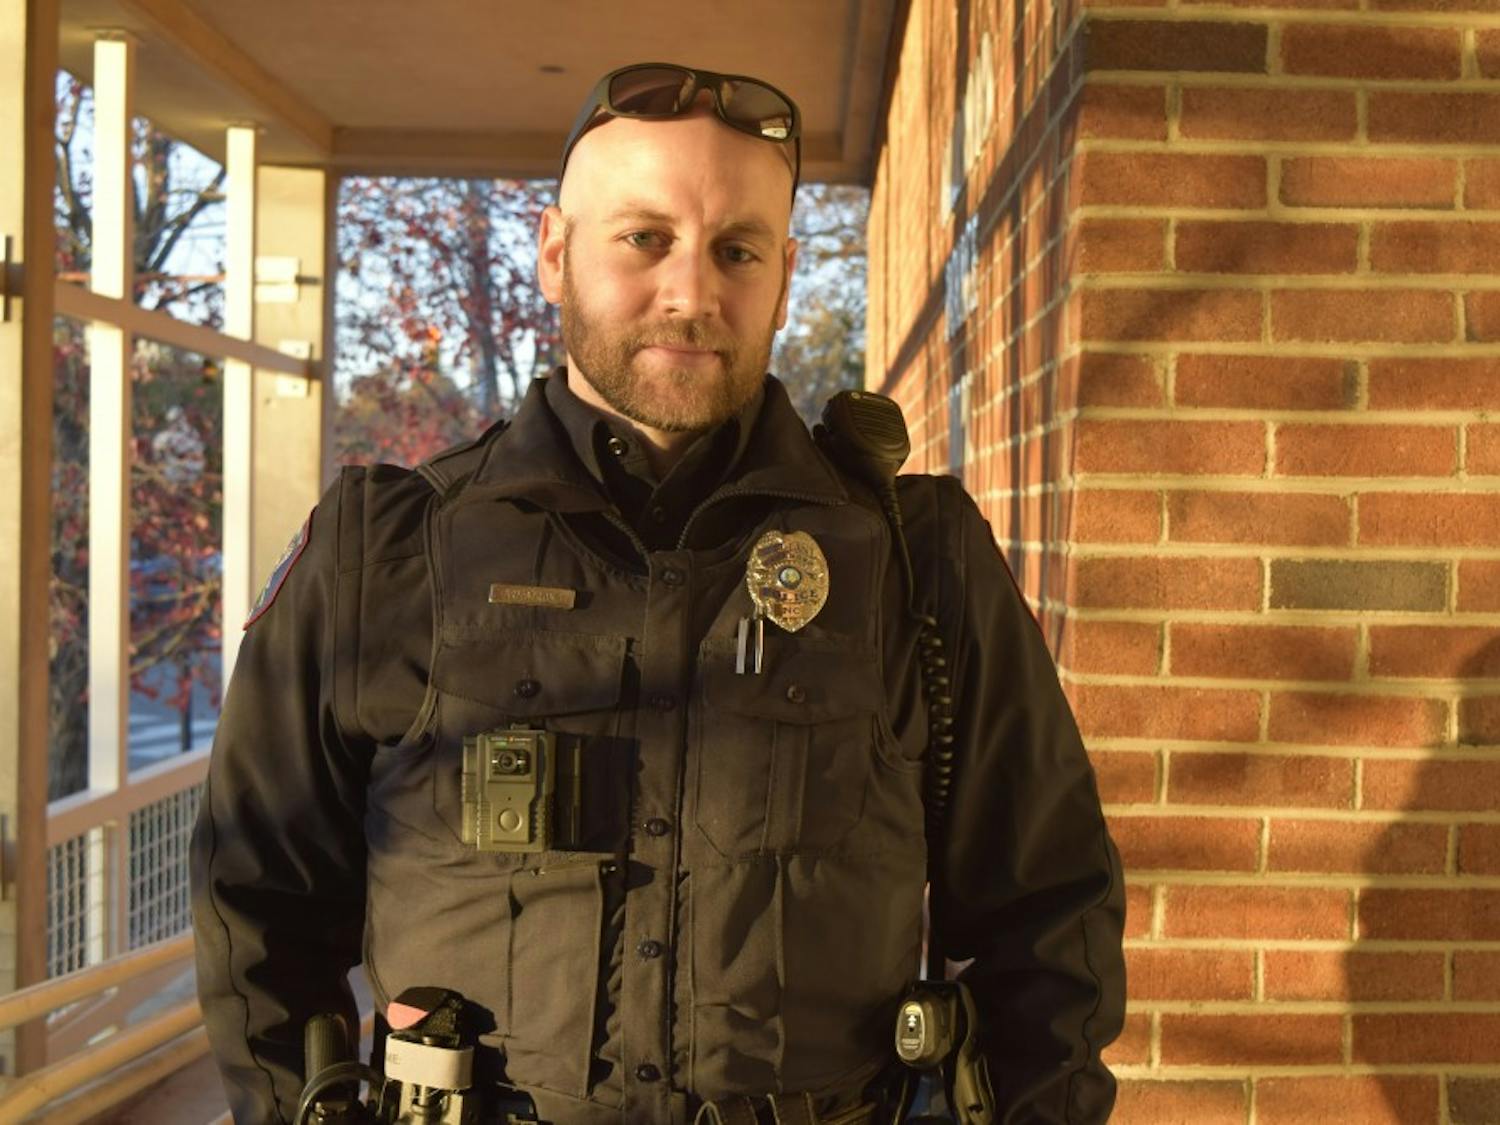 Sgt. Armstrong, a police officer in Carrboro, displays his WatchGuard body cam outside the Carrboro Police Station Wednesday, Nov. 28. The Carrboro Police Department recently received body cams for their officers to use while in the field. 